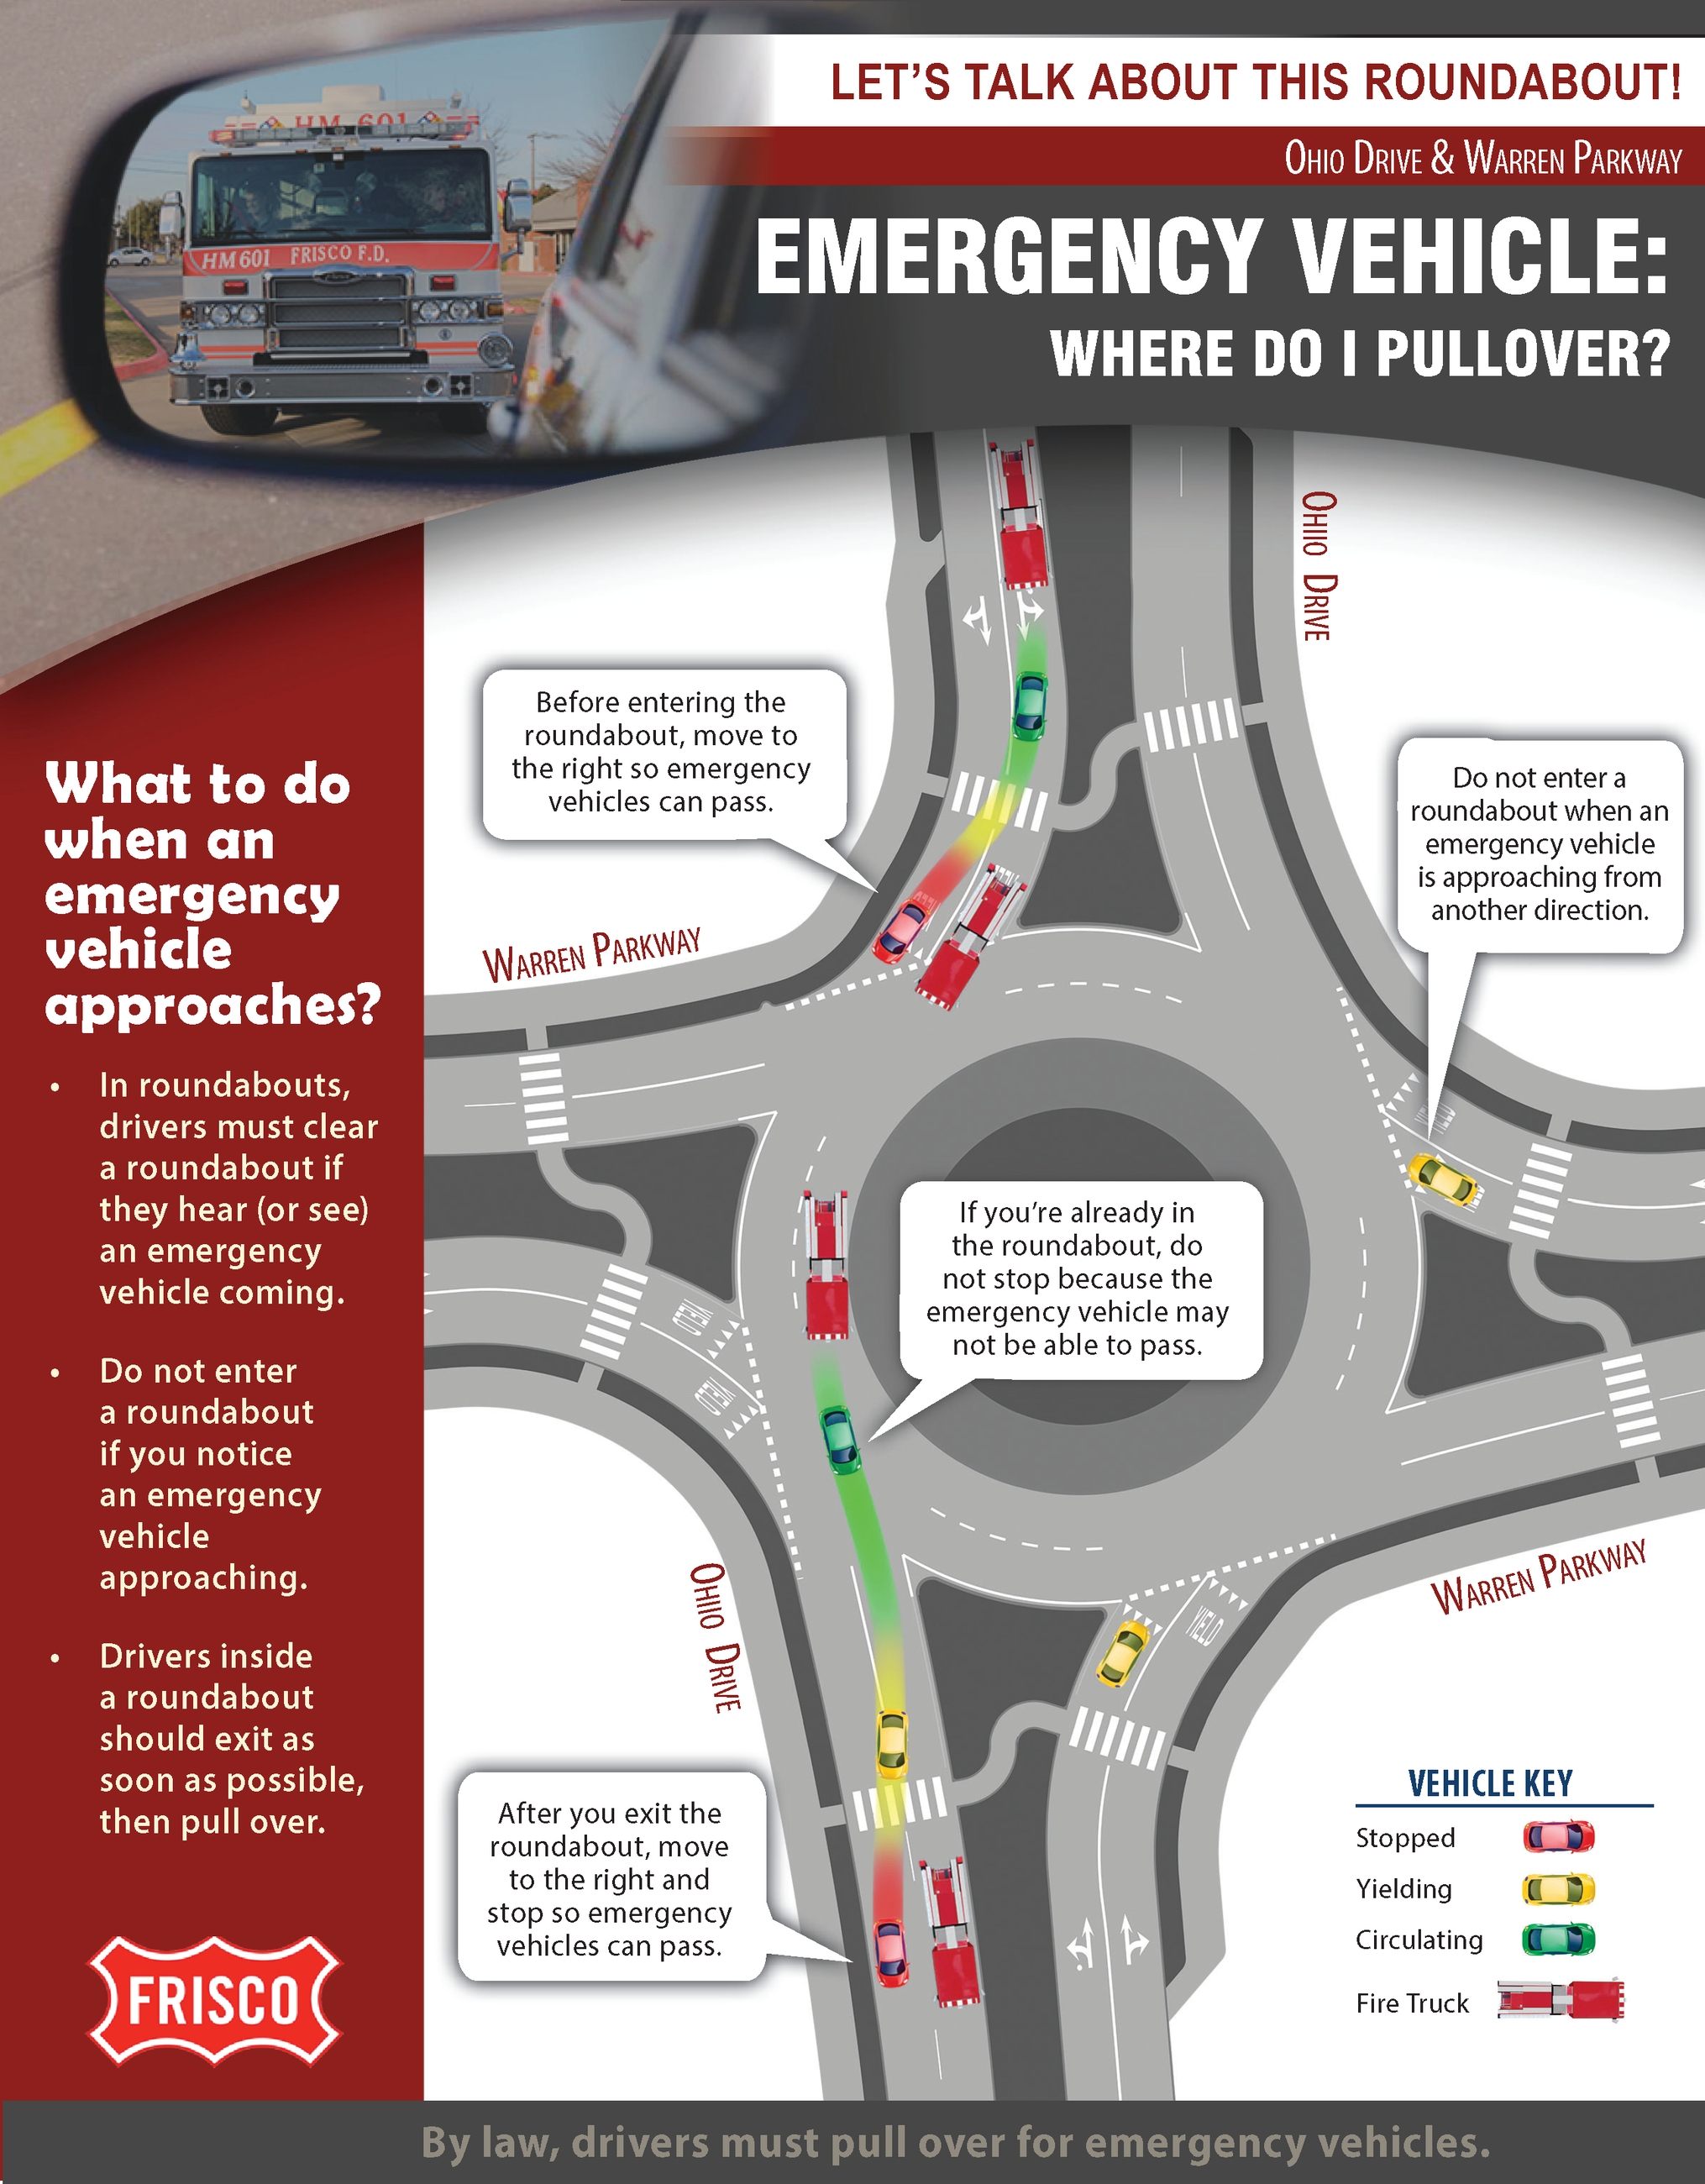 Yield to Emergency Vehicles in a Roundabout